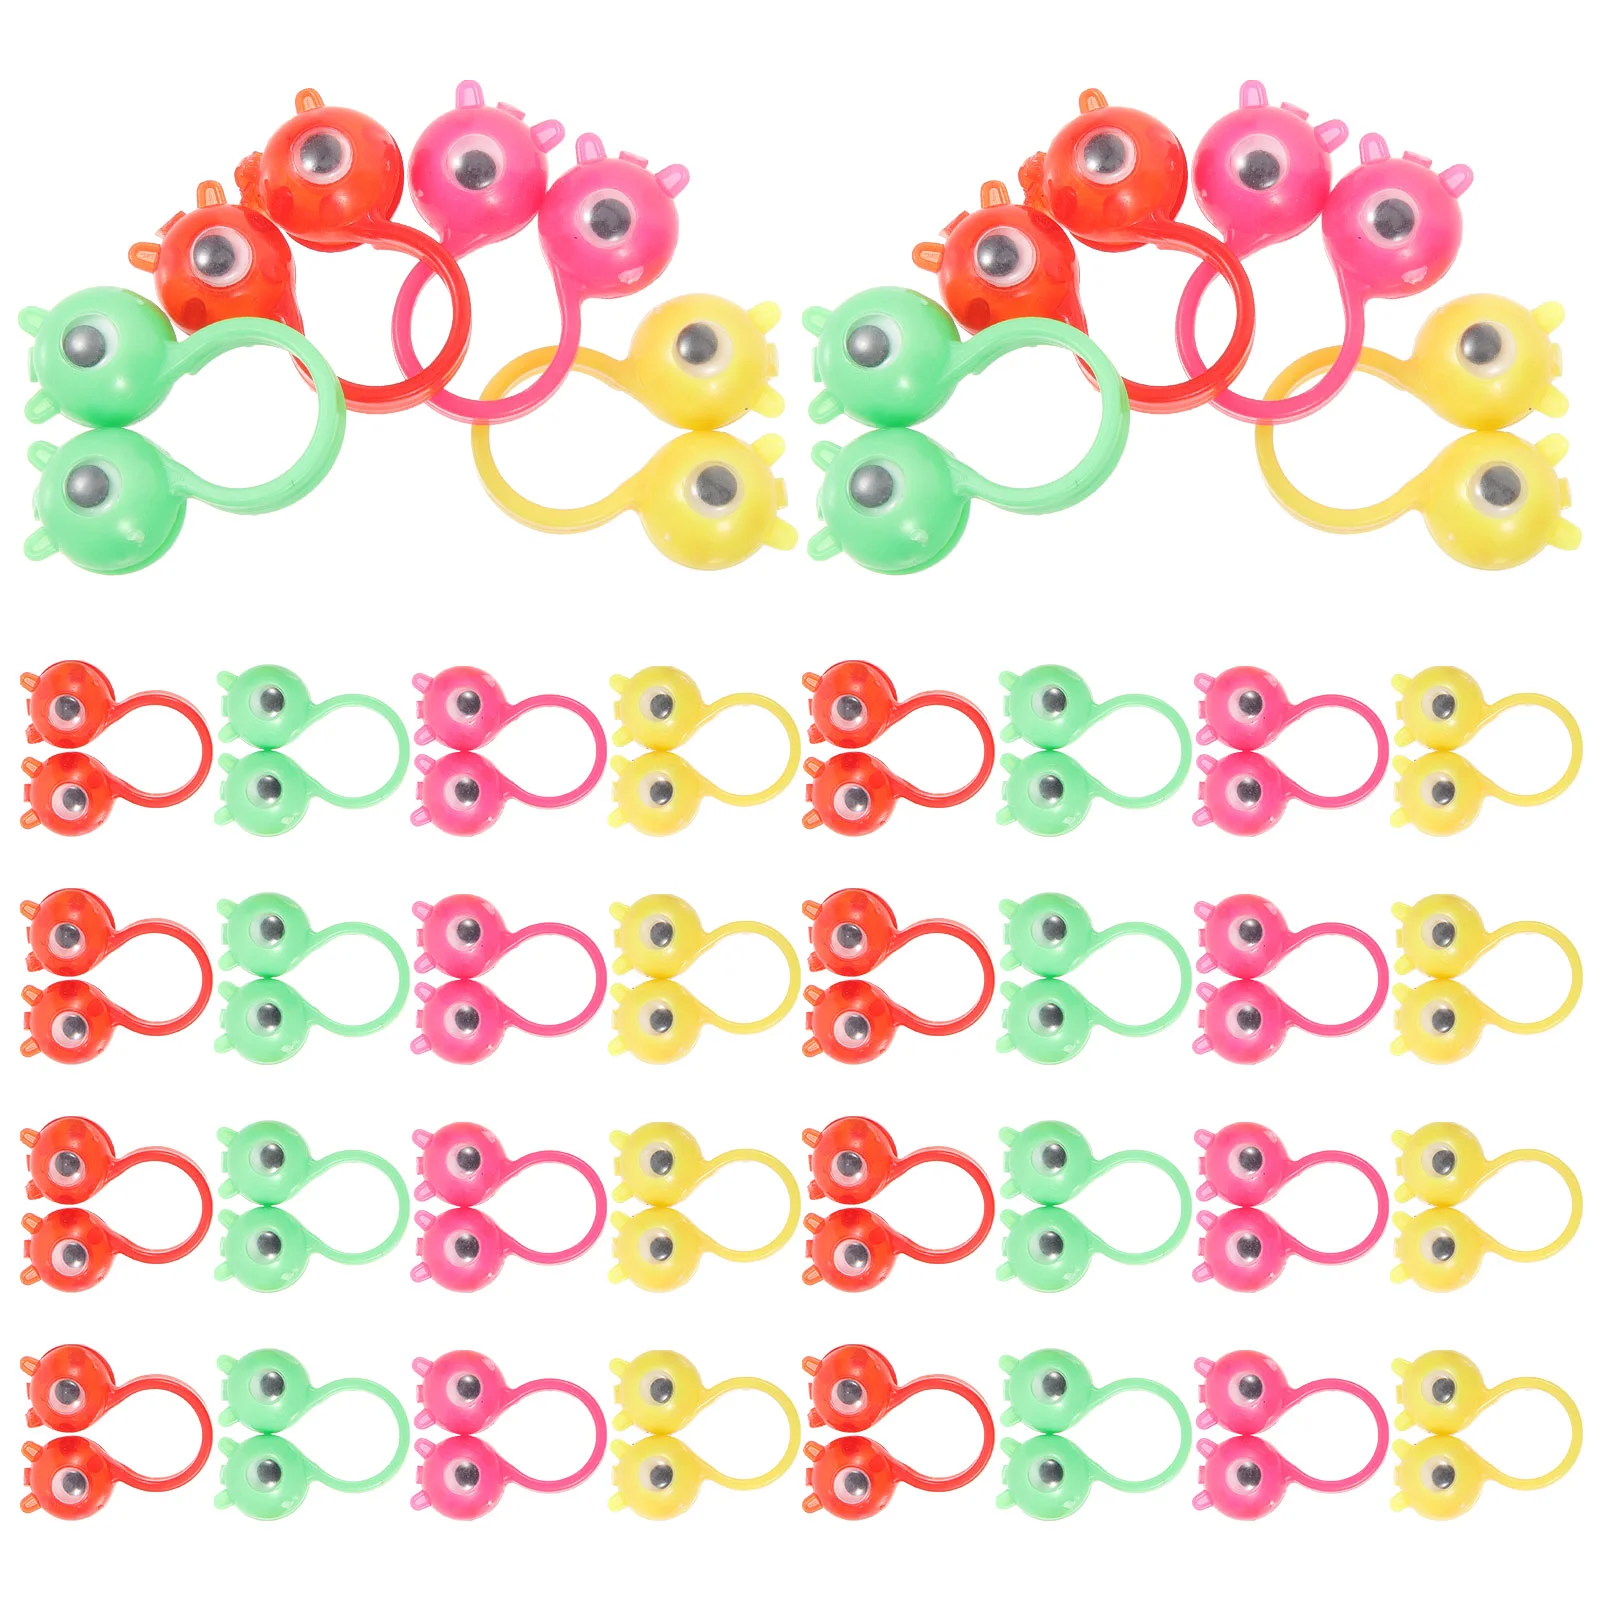 

50 Pcs Puzzle Toys Funny Eye Ring Party Favor Eyeball Finger Puppet Cute Interesting Plastic Lovely Plaything On Rings